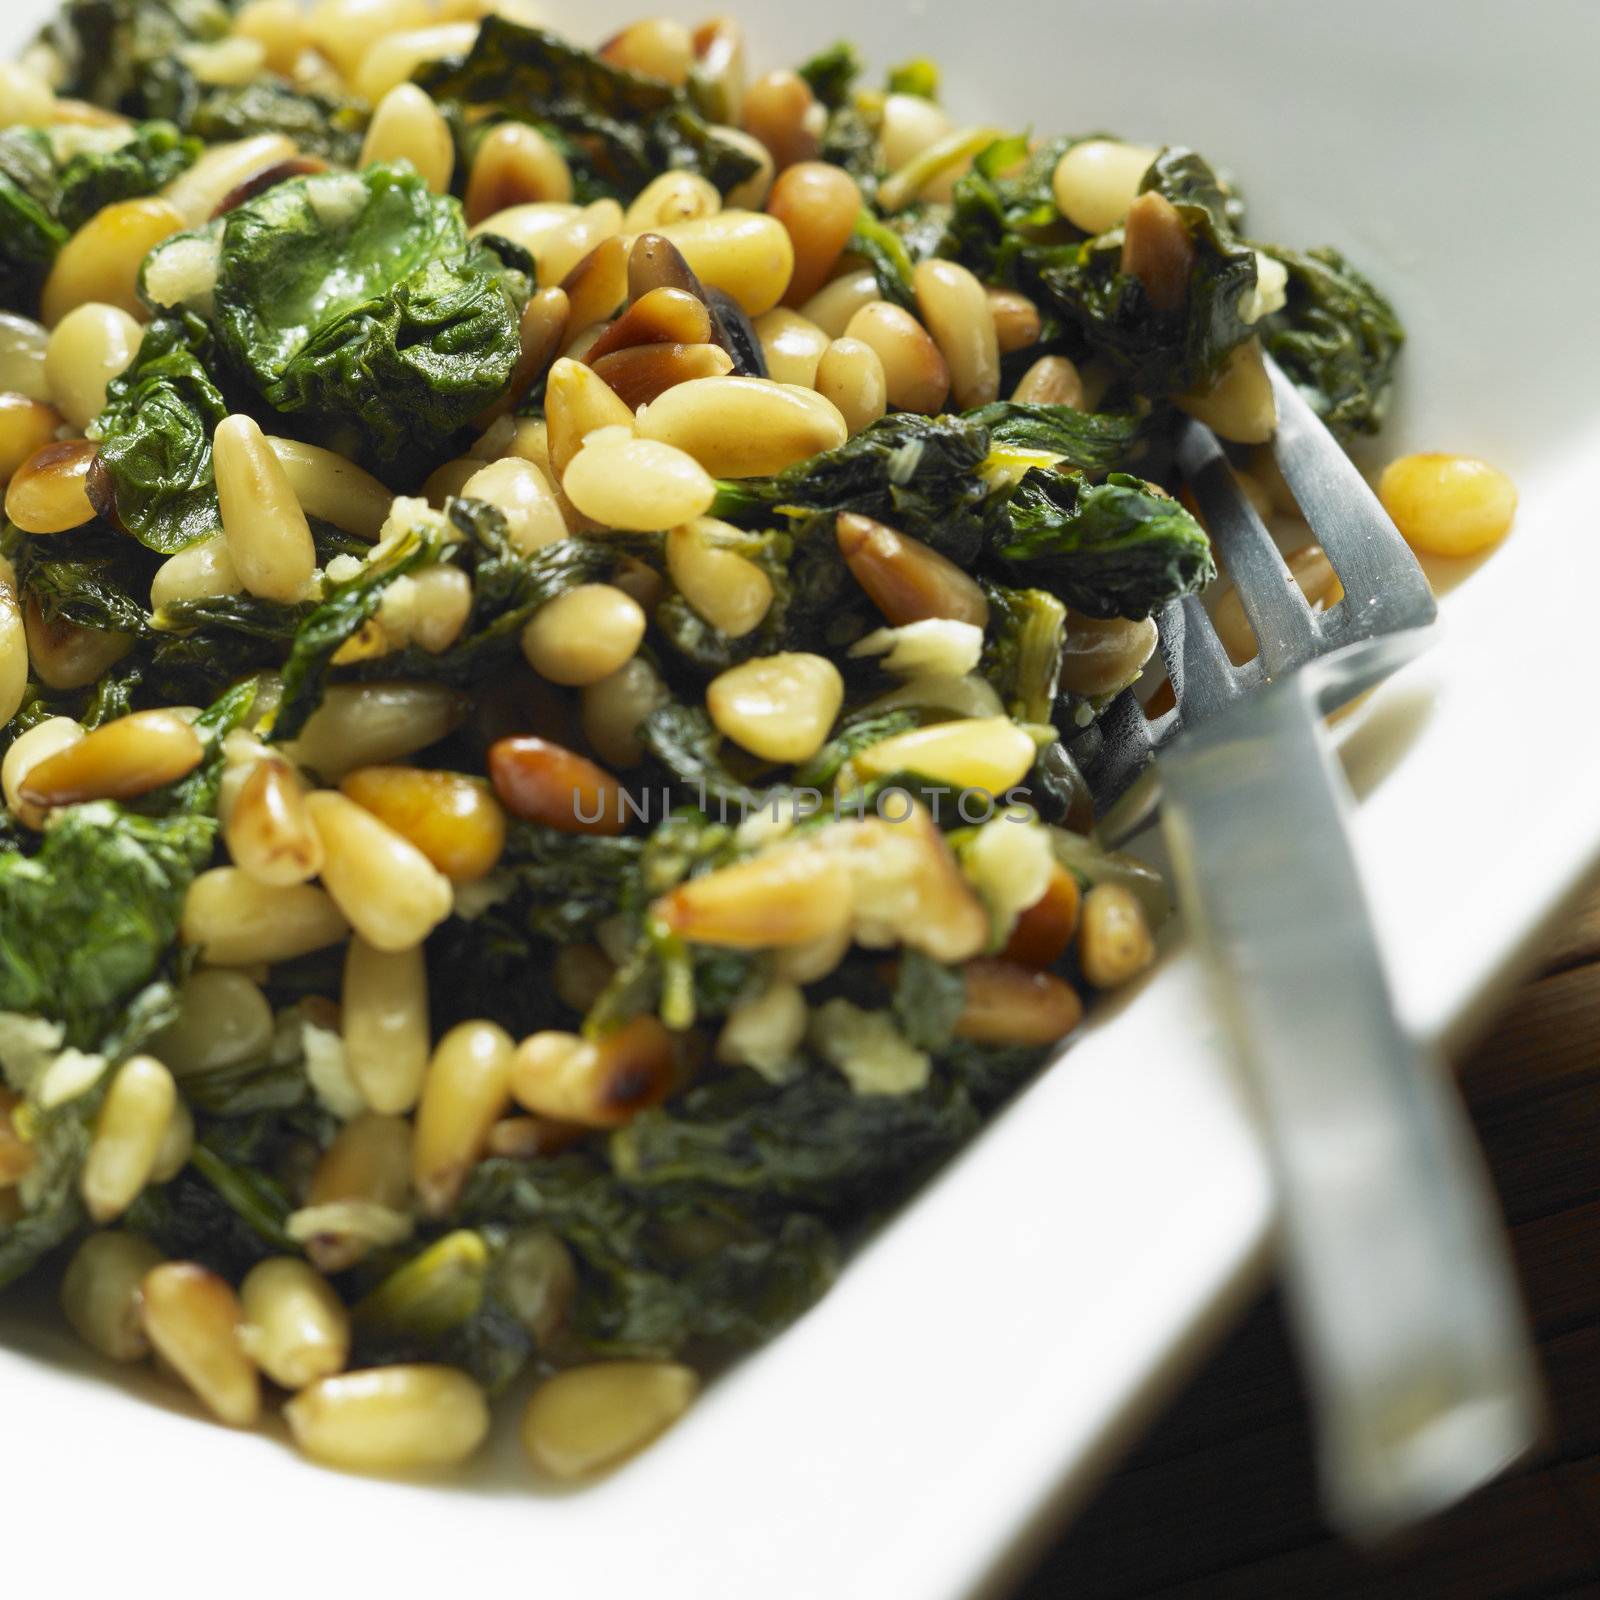 spinach with pine nuts by phbcz